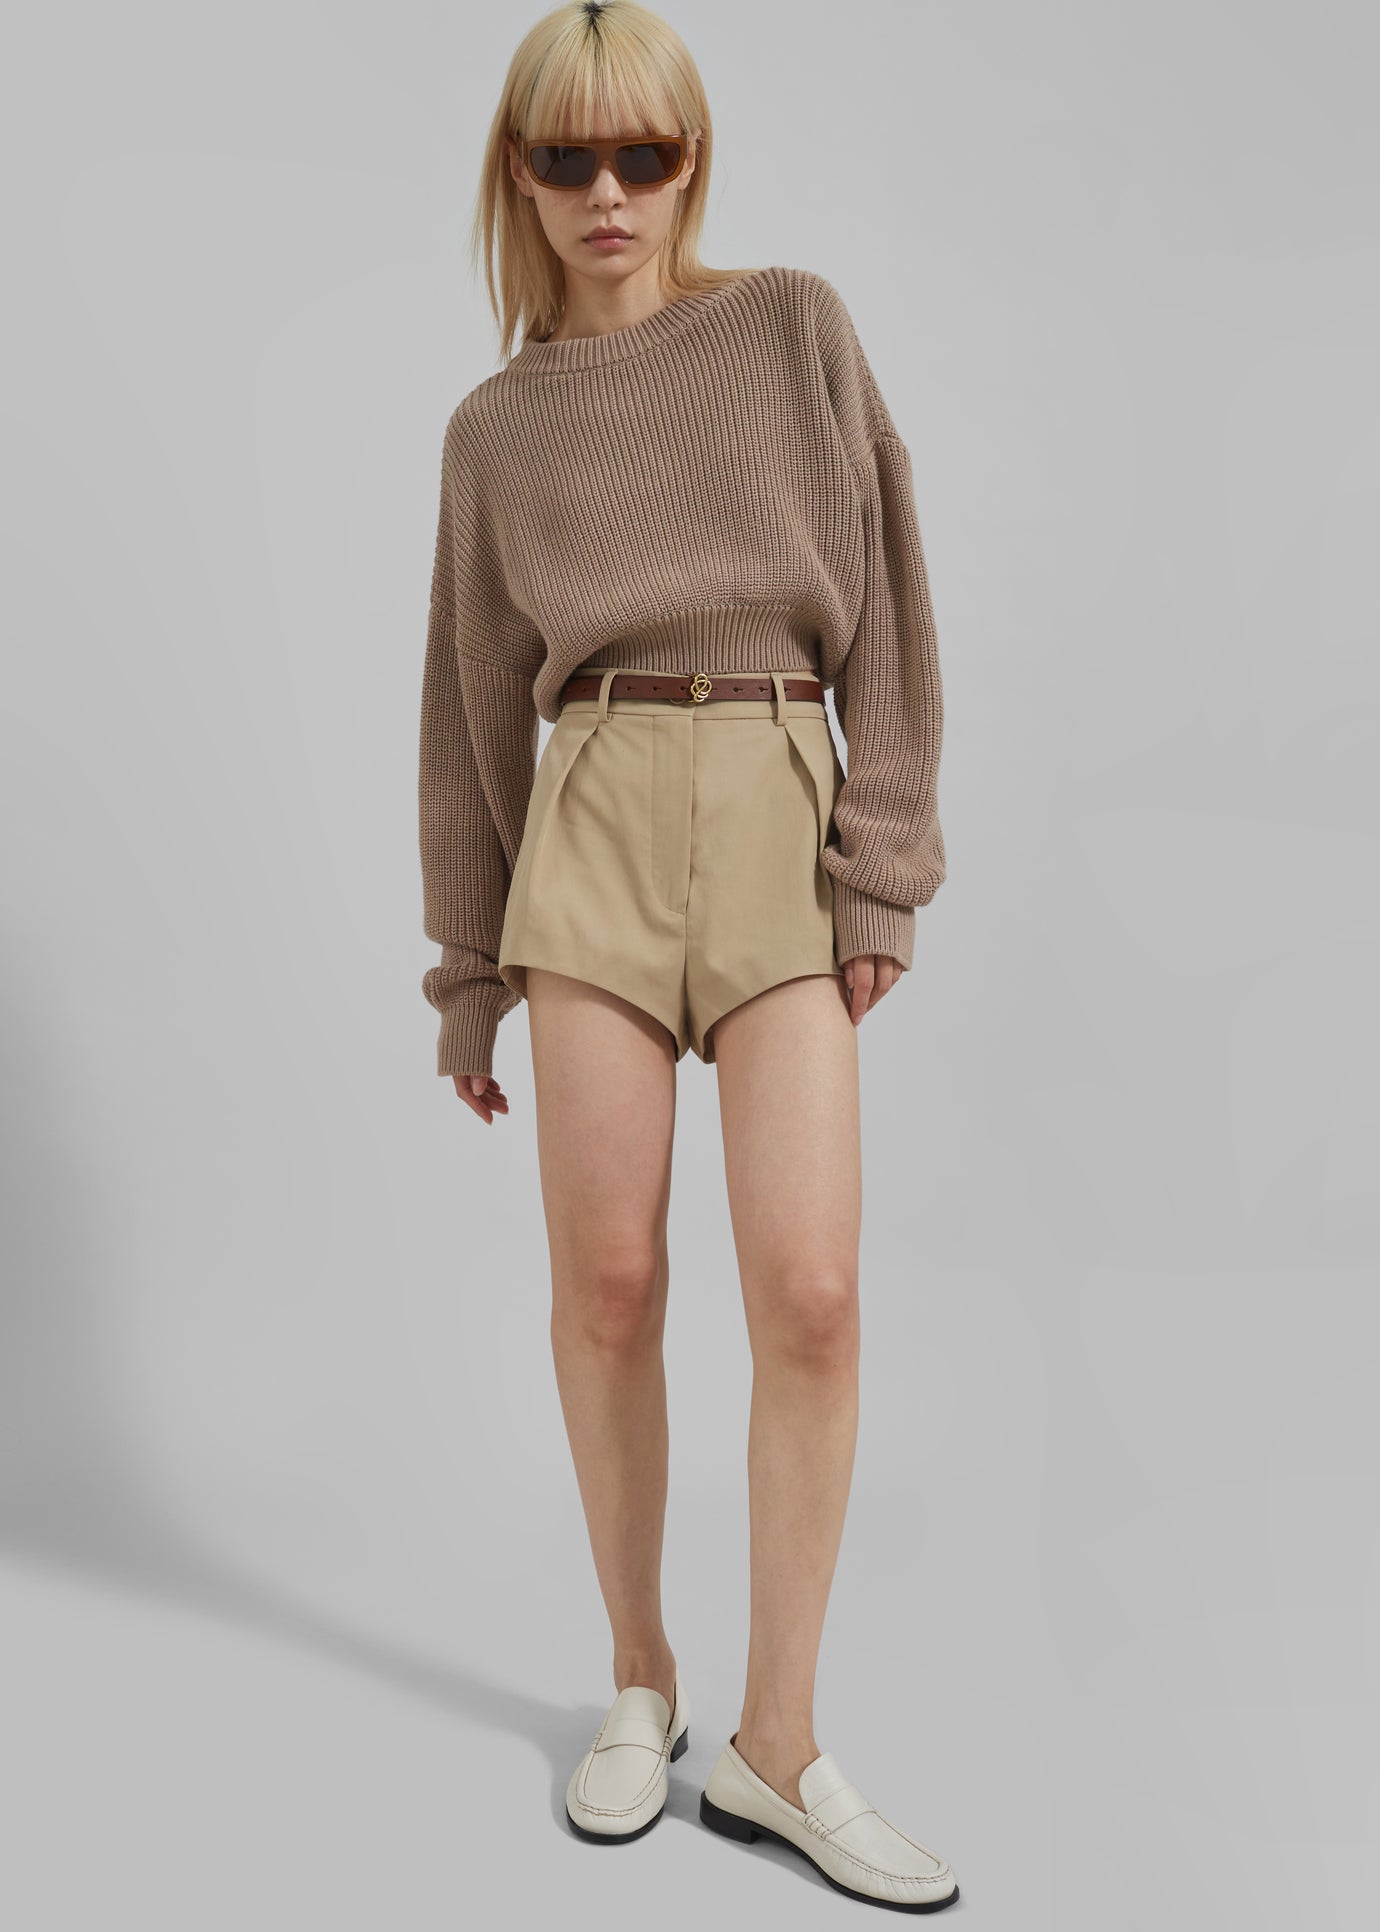 Teague Cropped Sweater - Beige